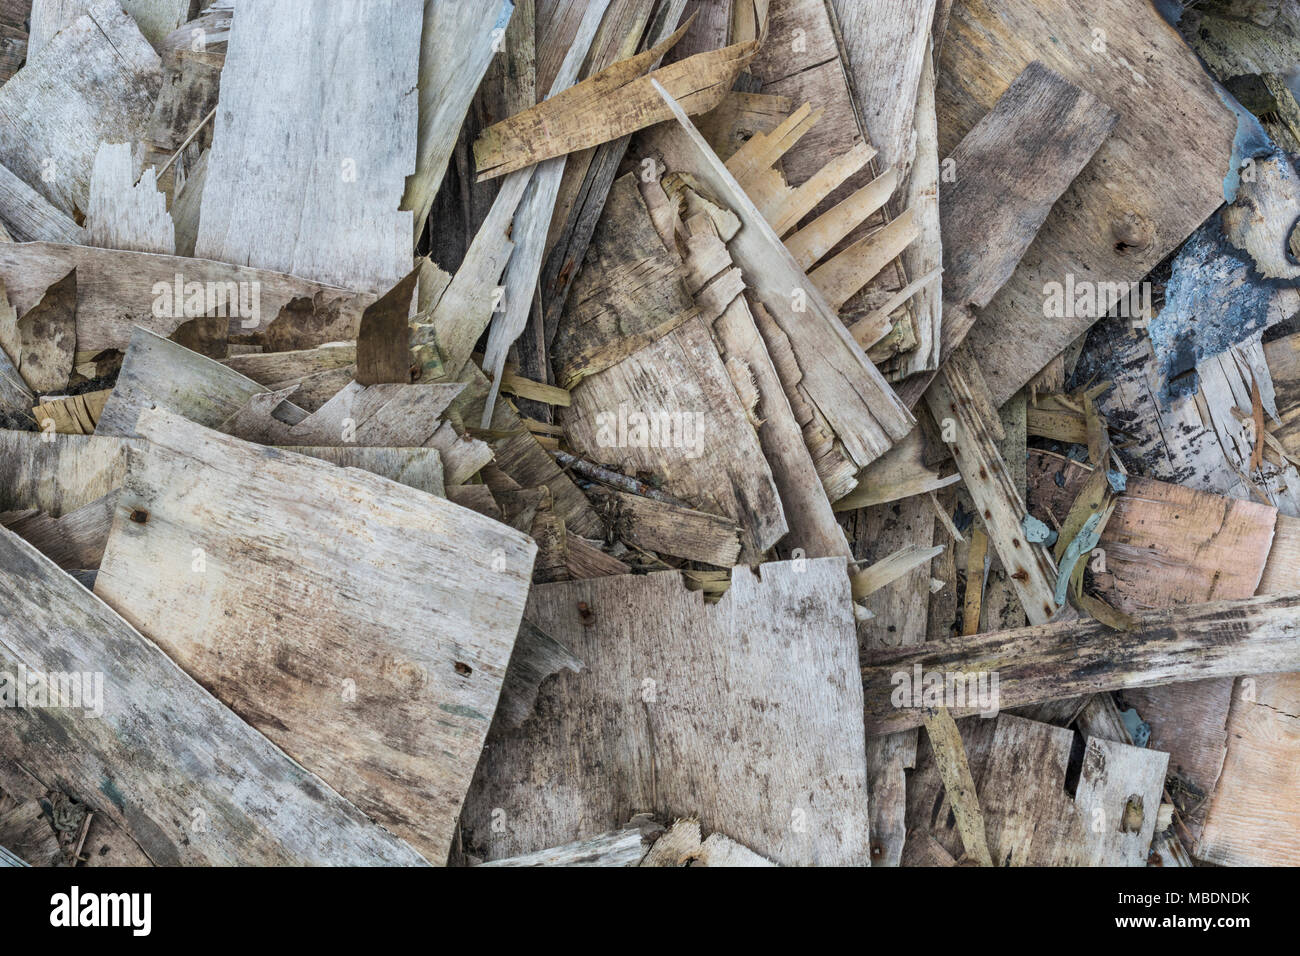 Pile of plywood pieces which are rotting / decaying and falling apart and flaking. Stock Photo